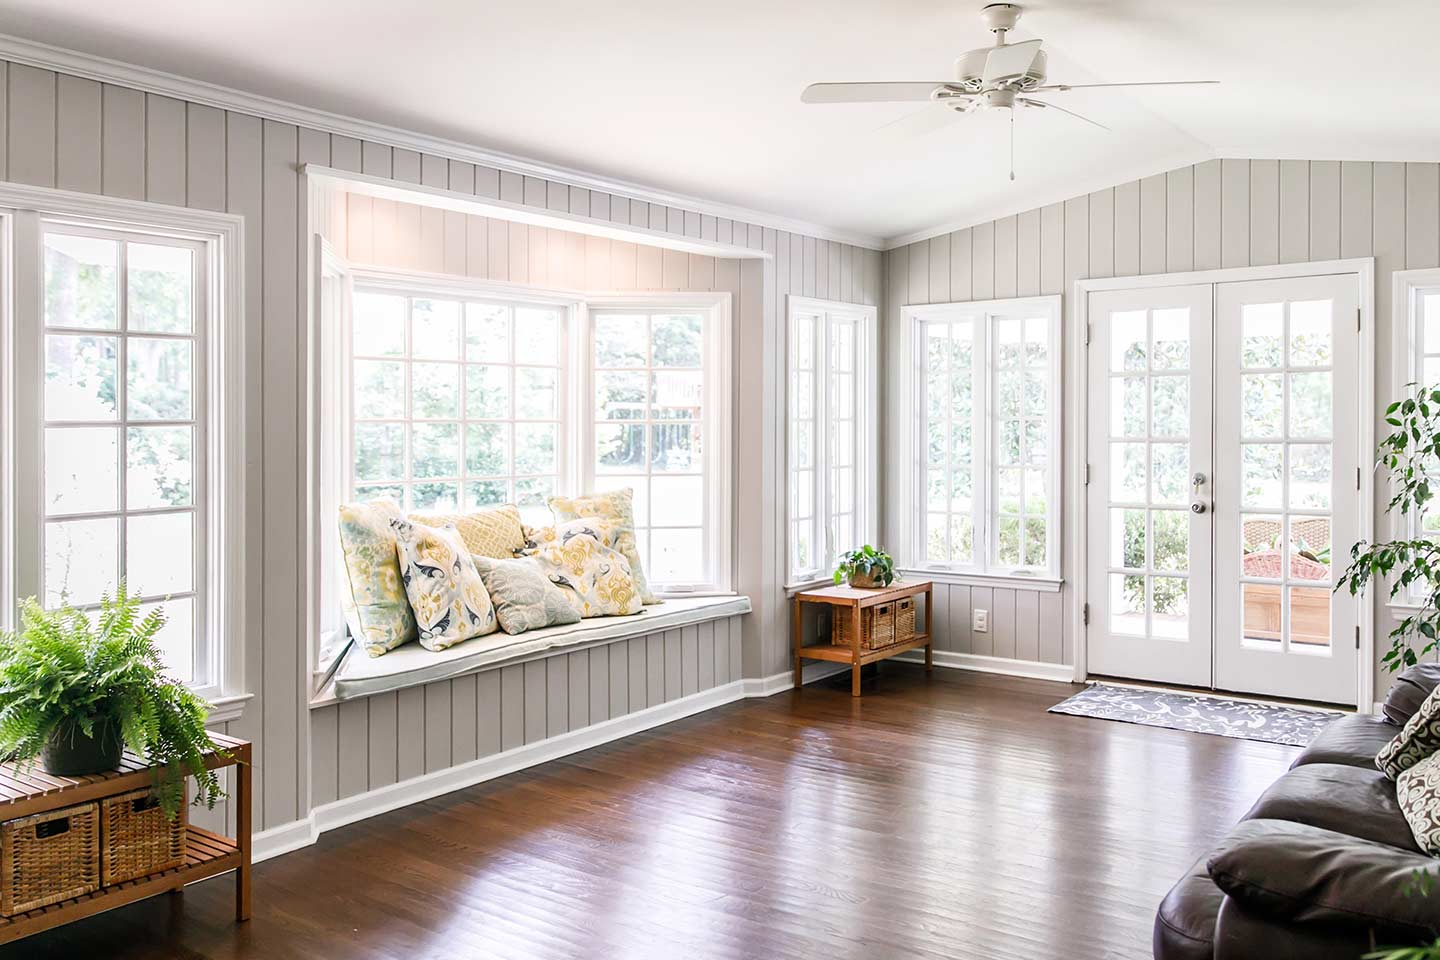 Gorgeous bay window with seat in a sunroom creates a cozy space for relaxation